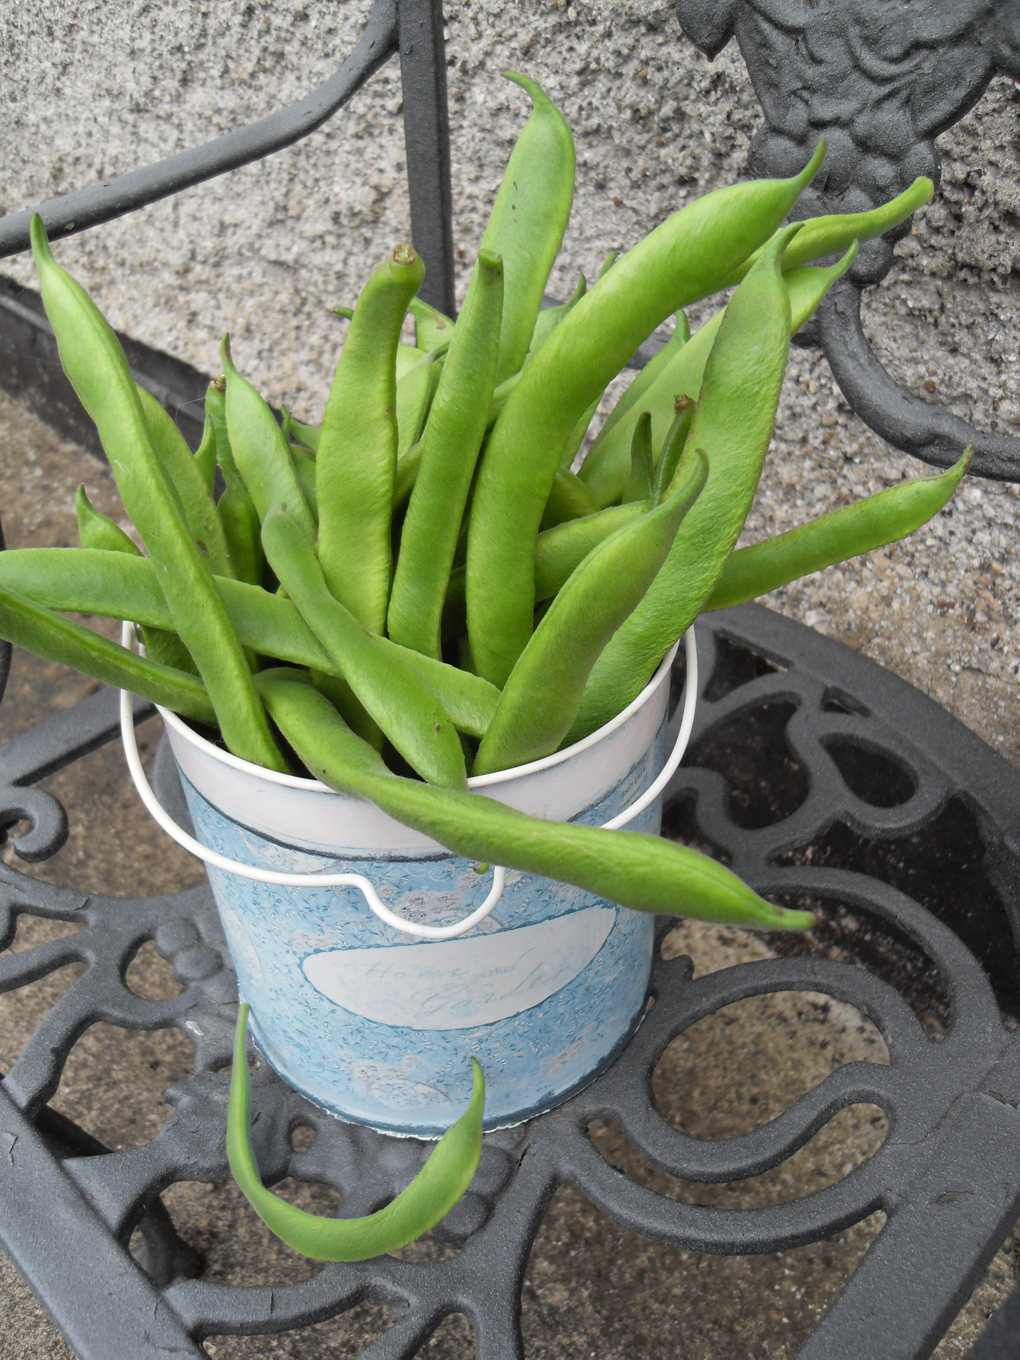 A pretty bucket full of newly picked runner beans